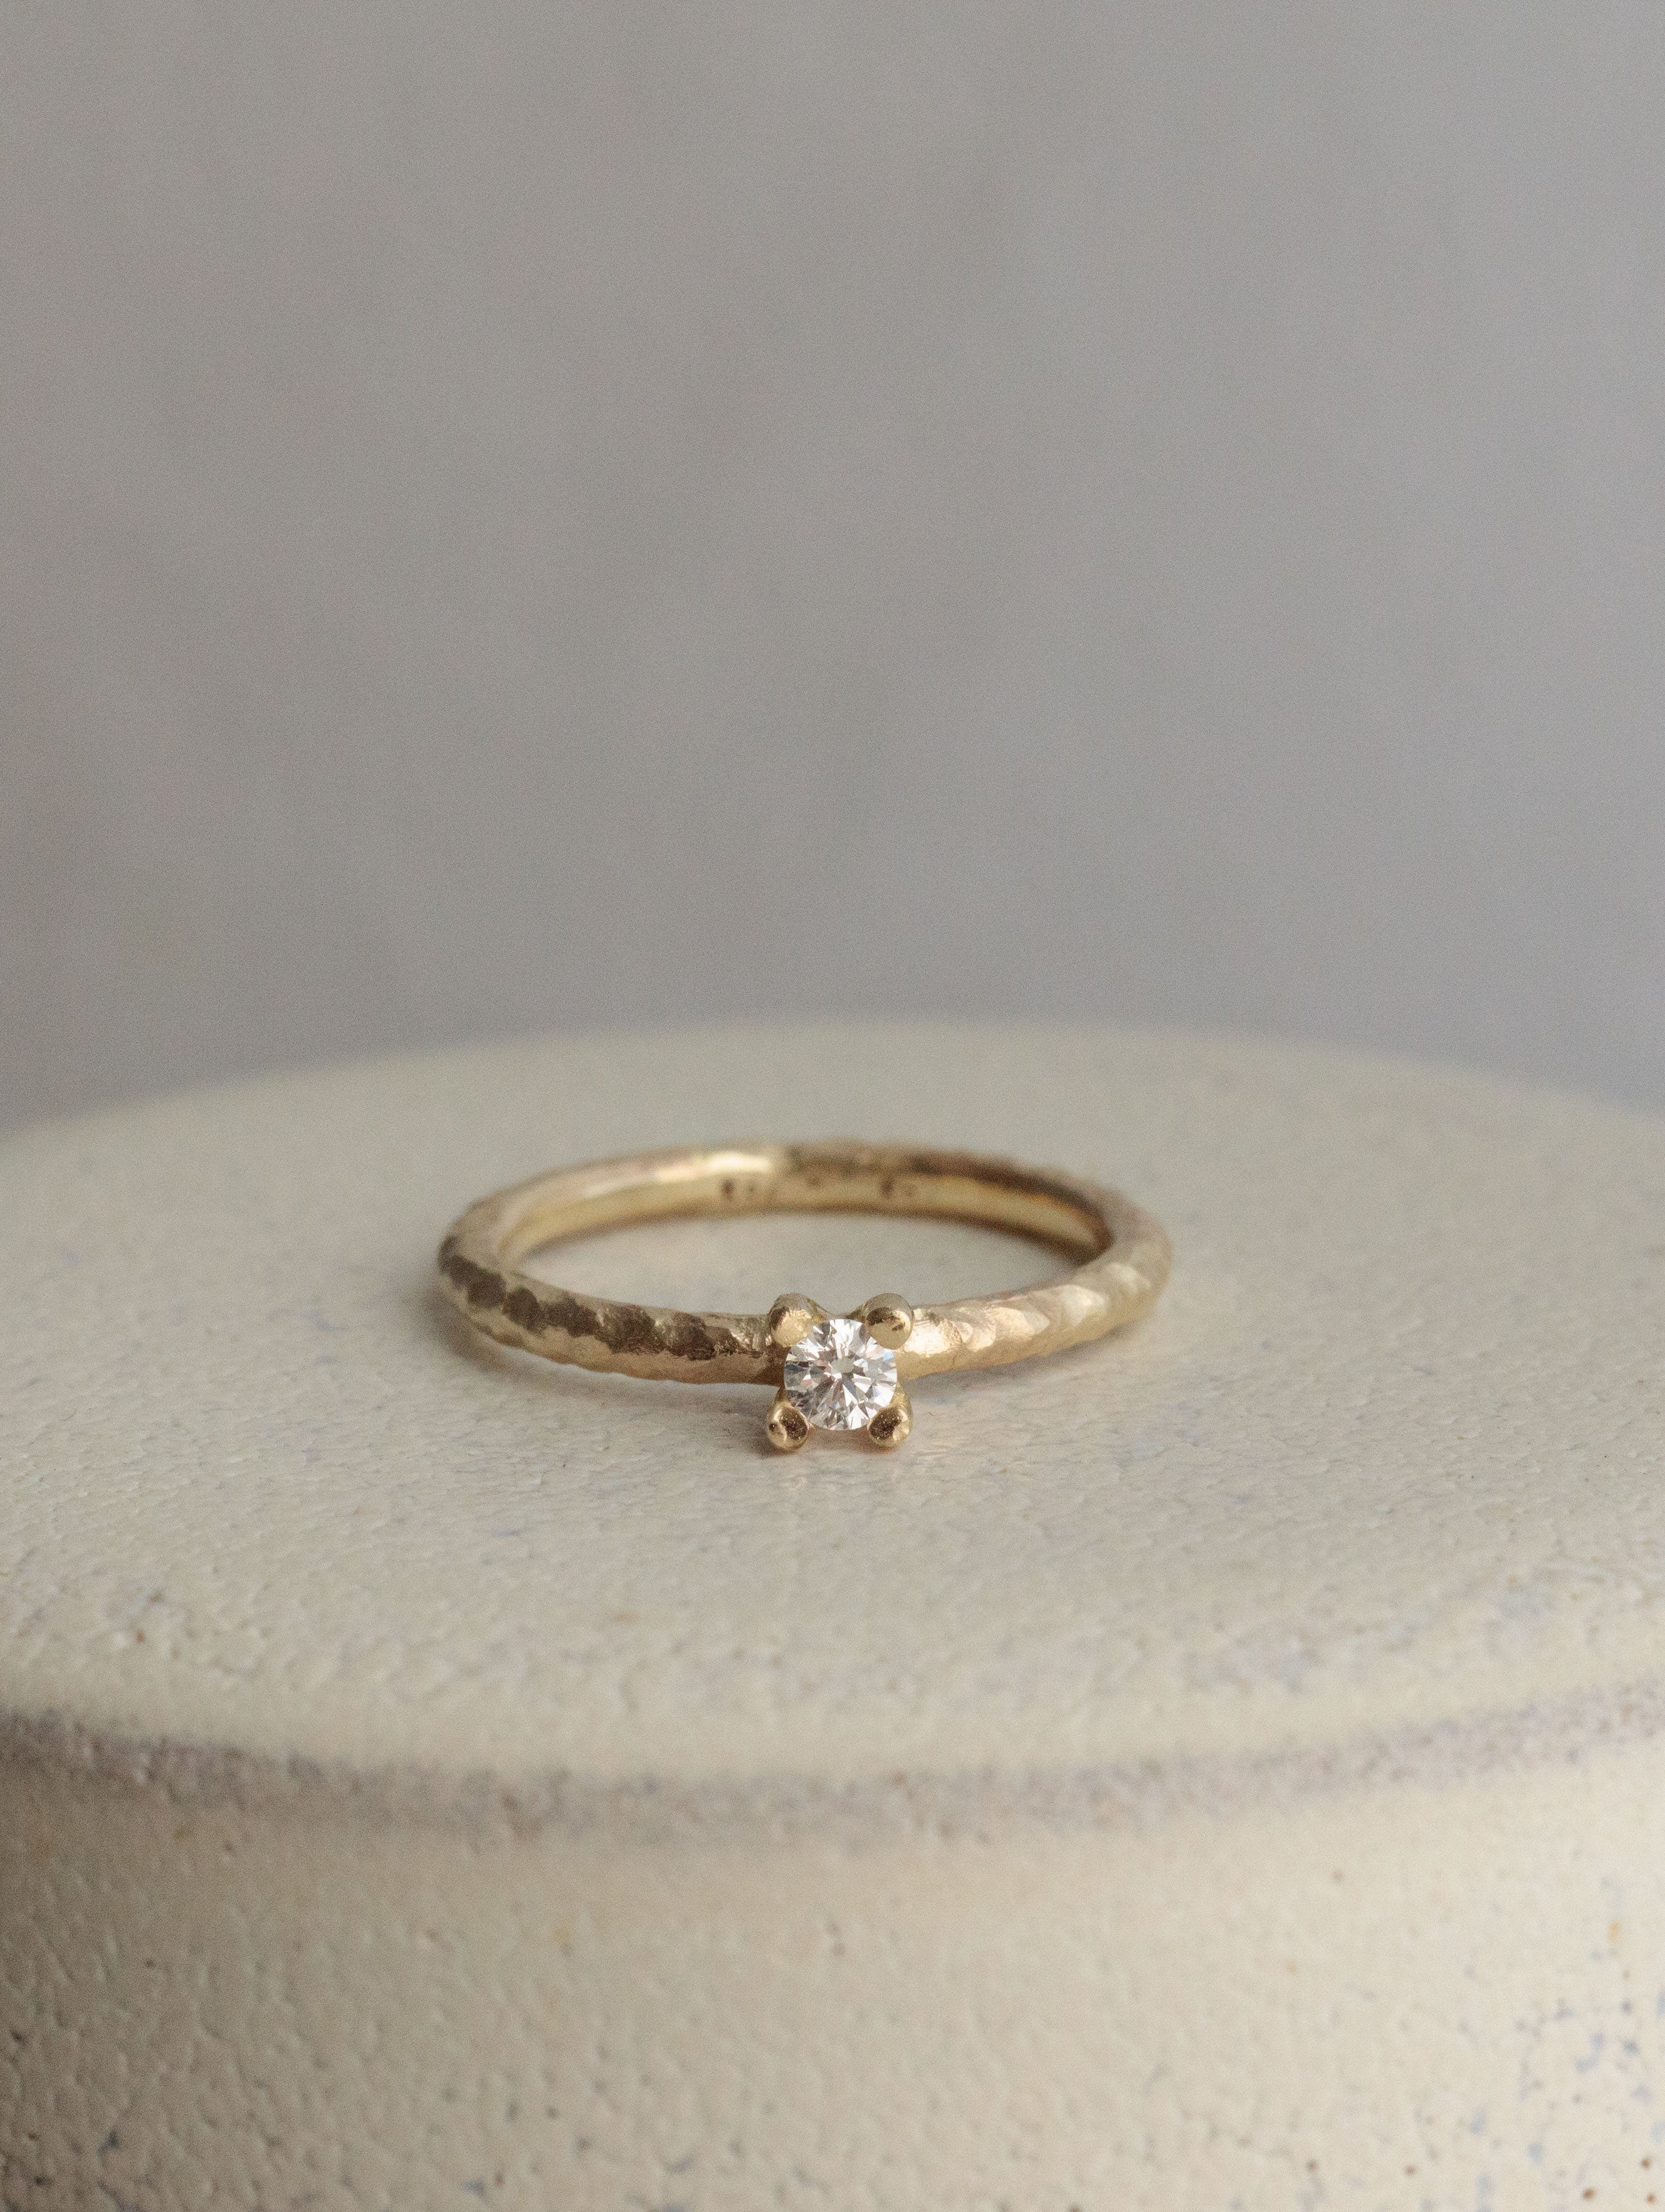 Textured diamond solitaire ring - Price on request